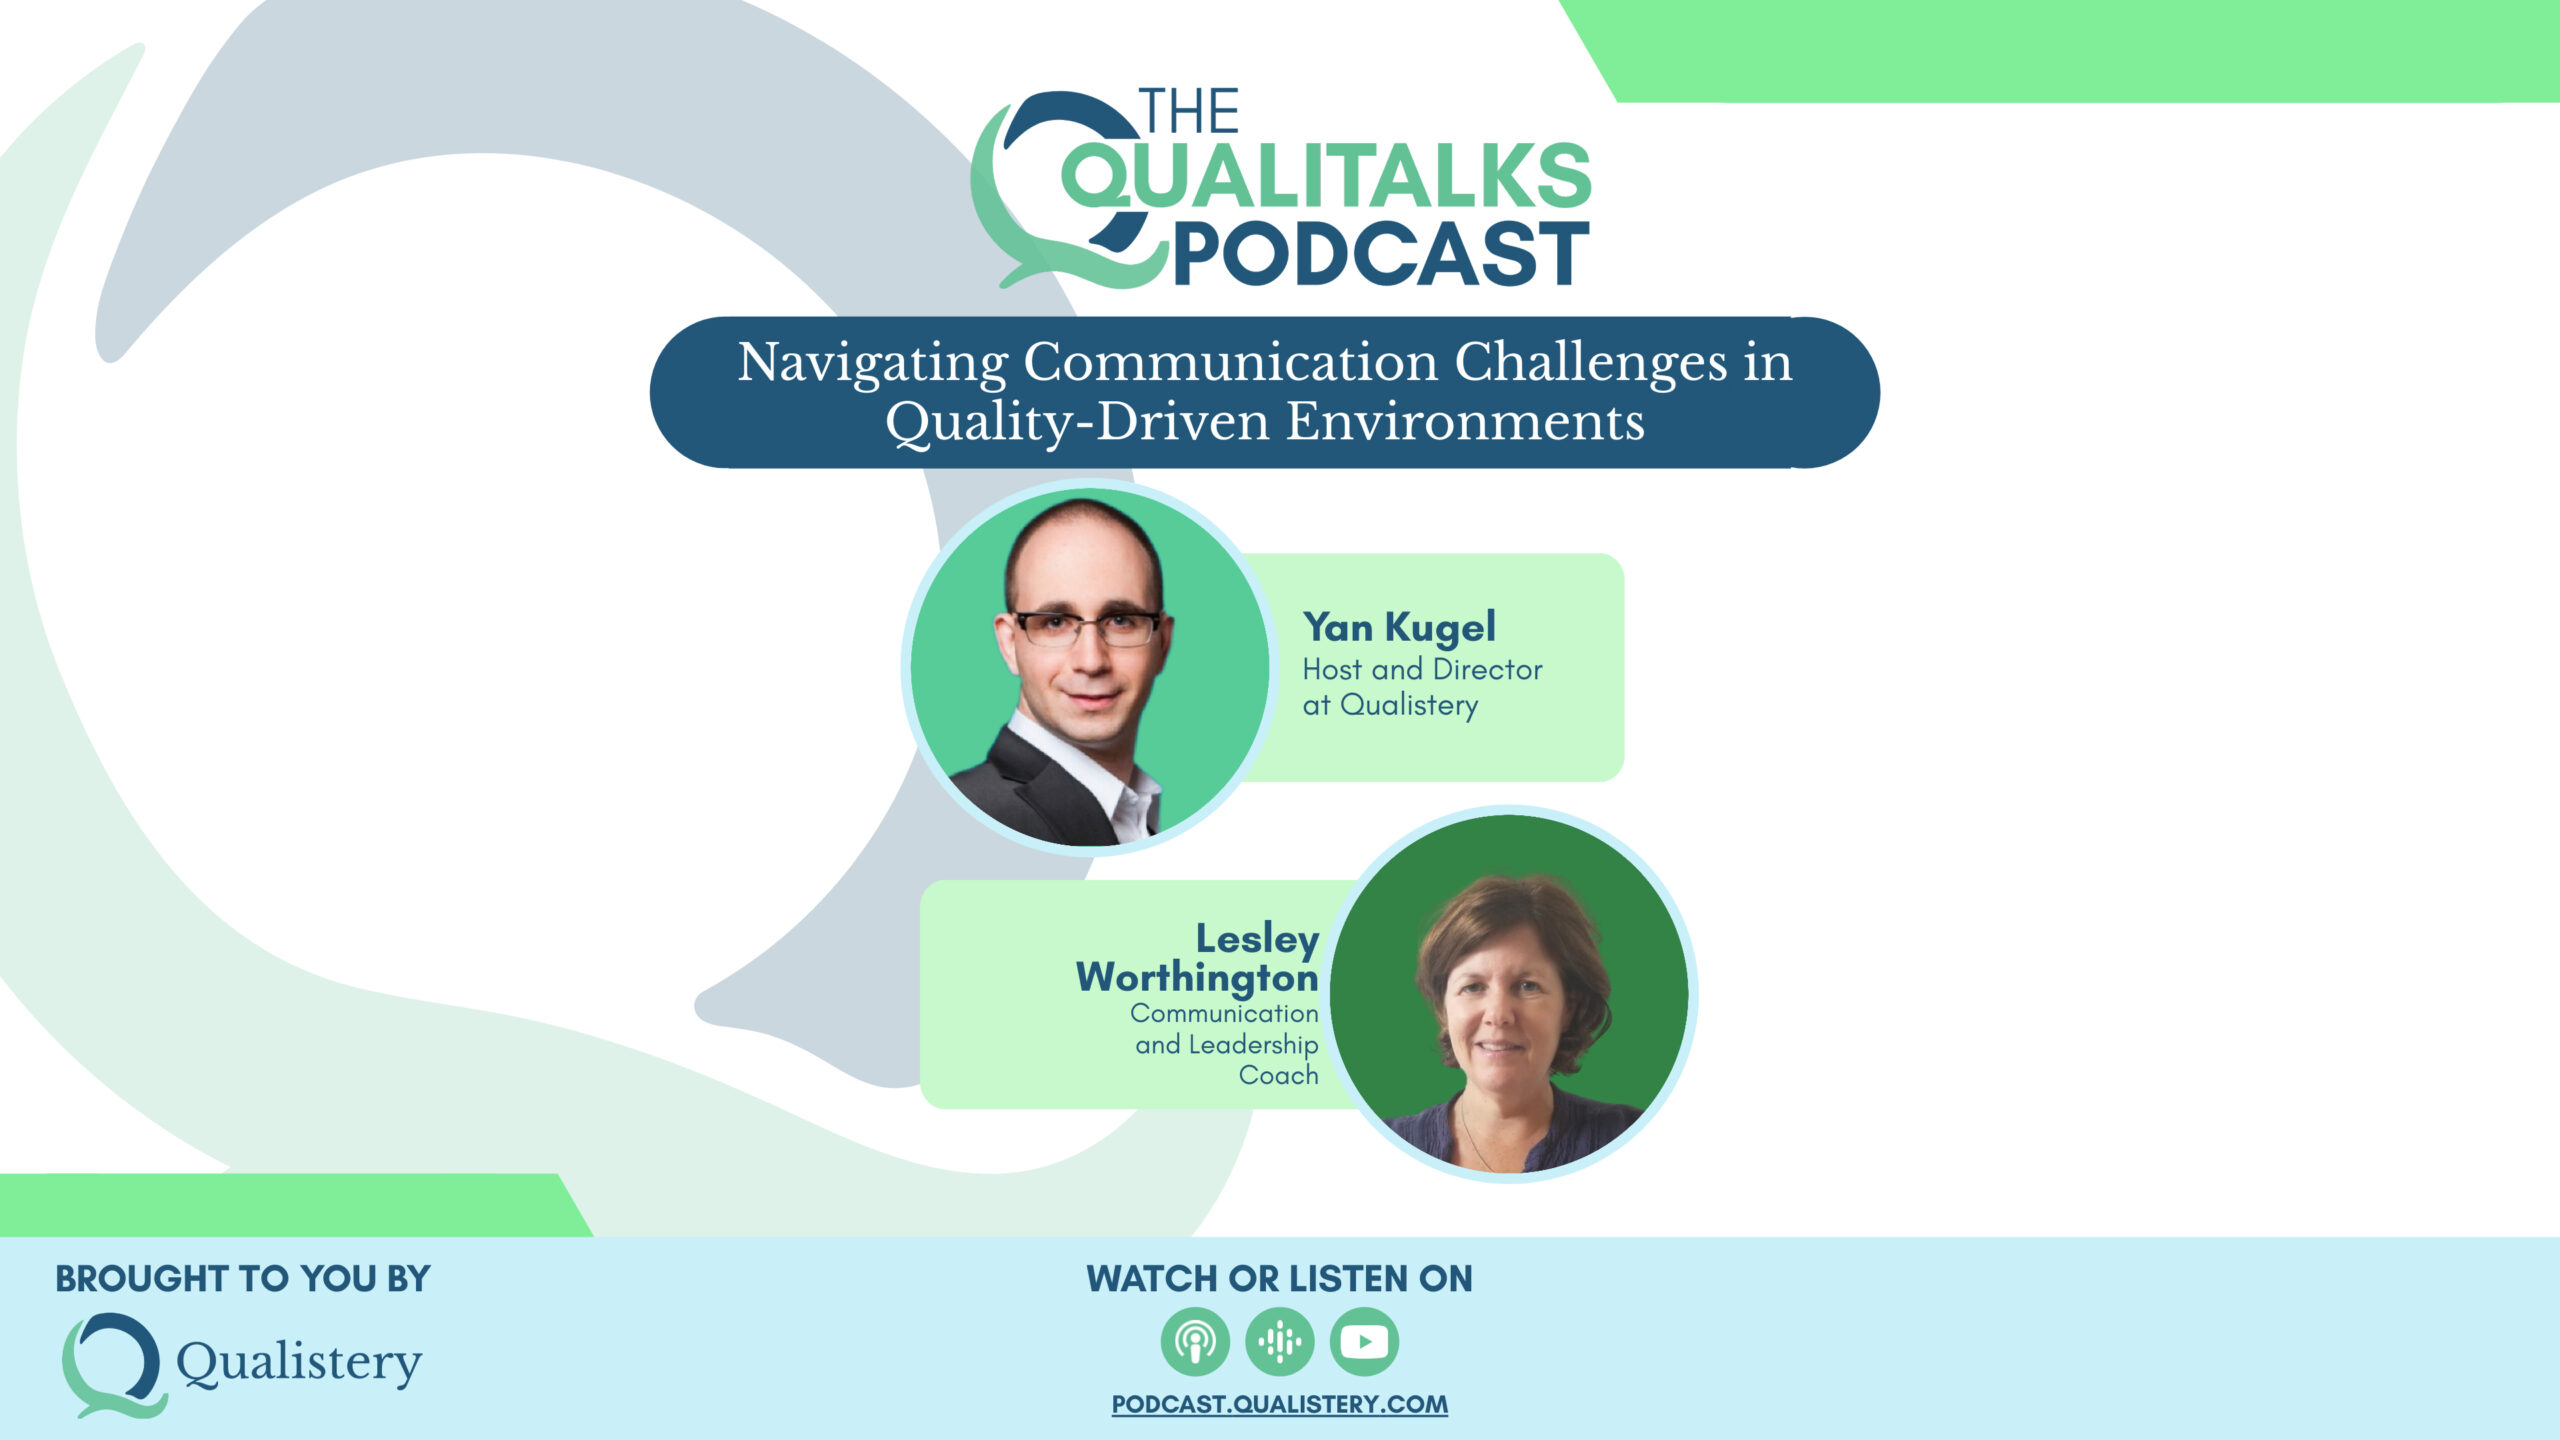 Navigating Communication Challenges in Quality-Driven Environments [Lesley Worthington]